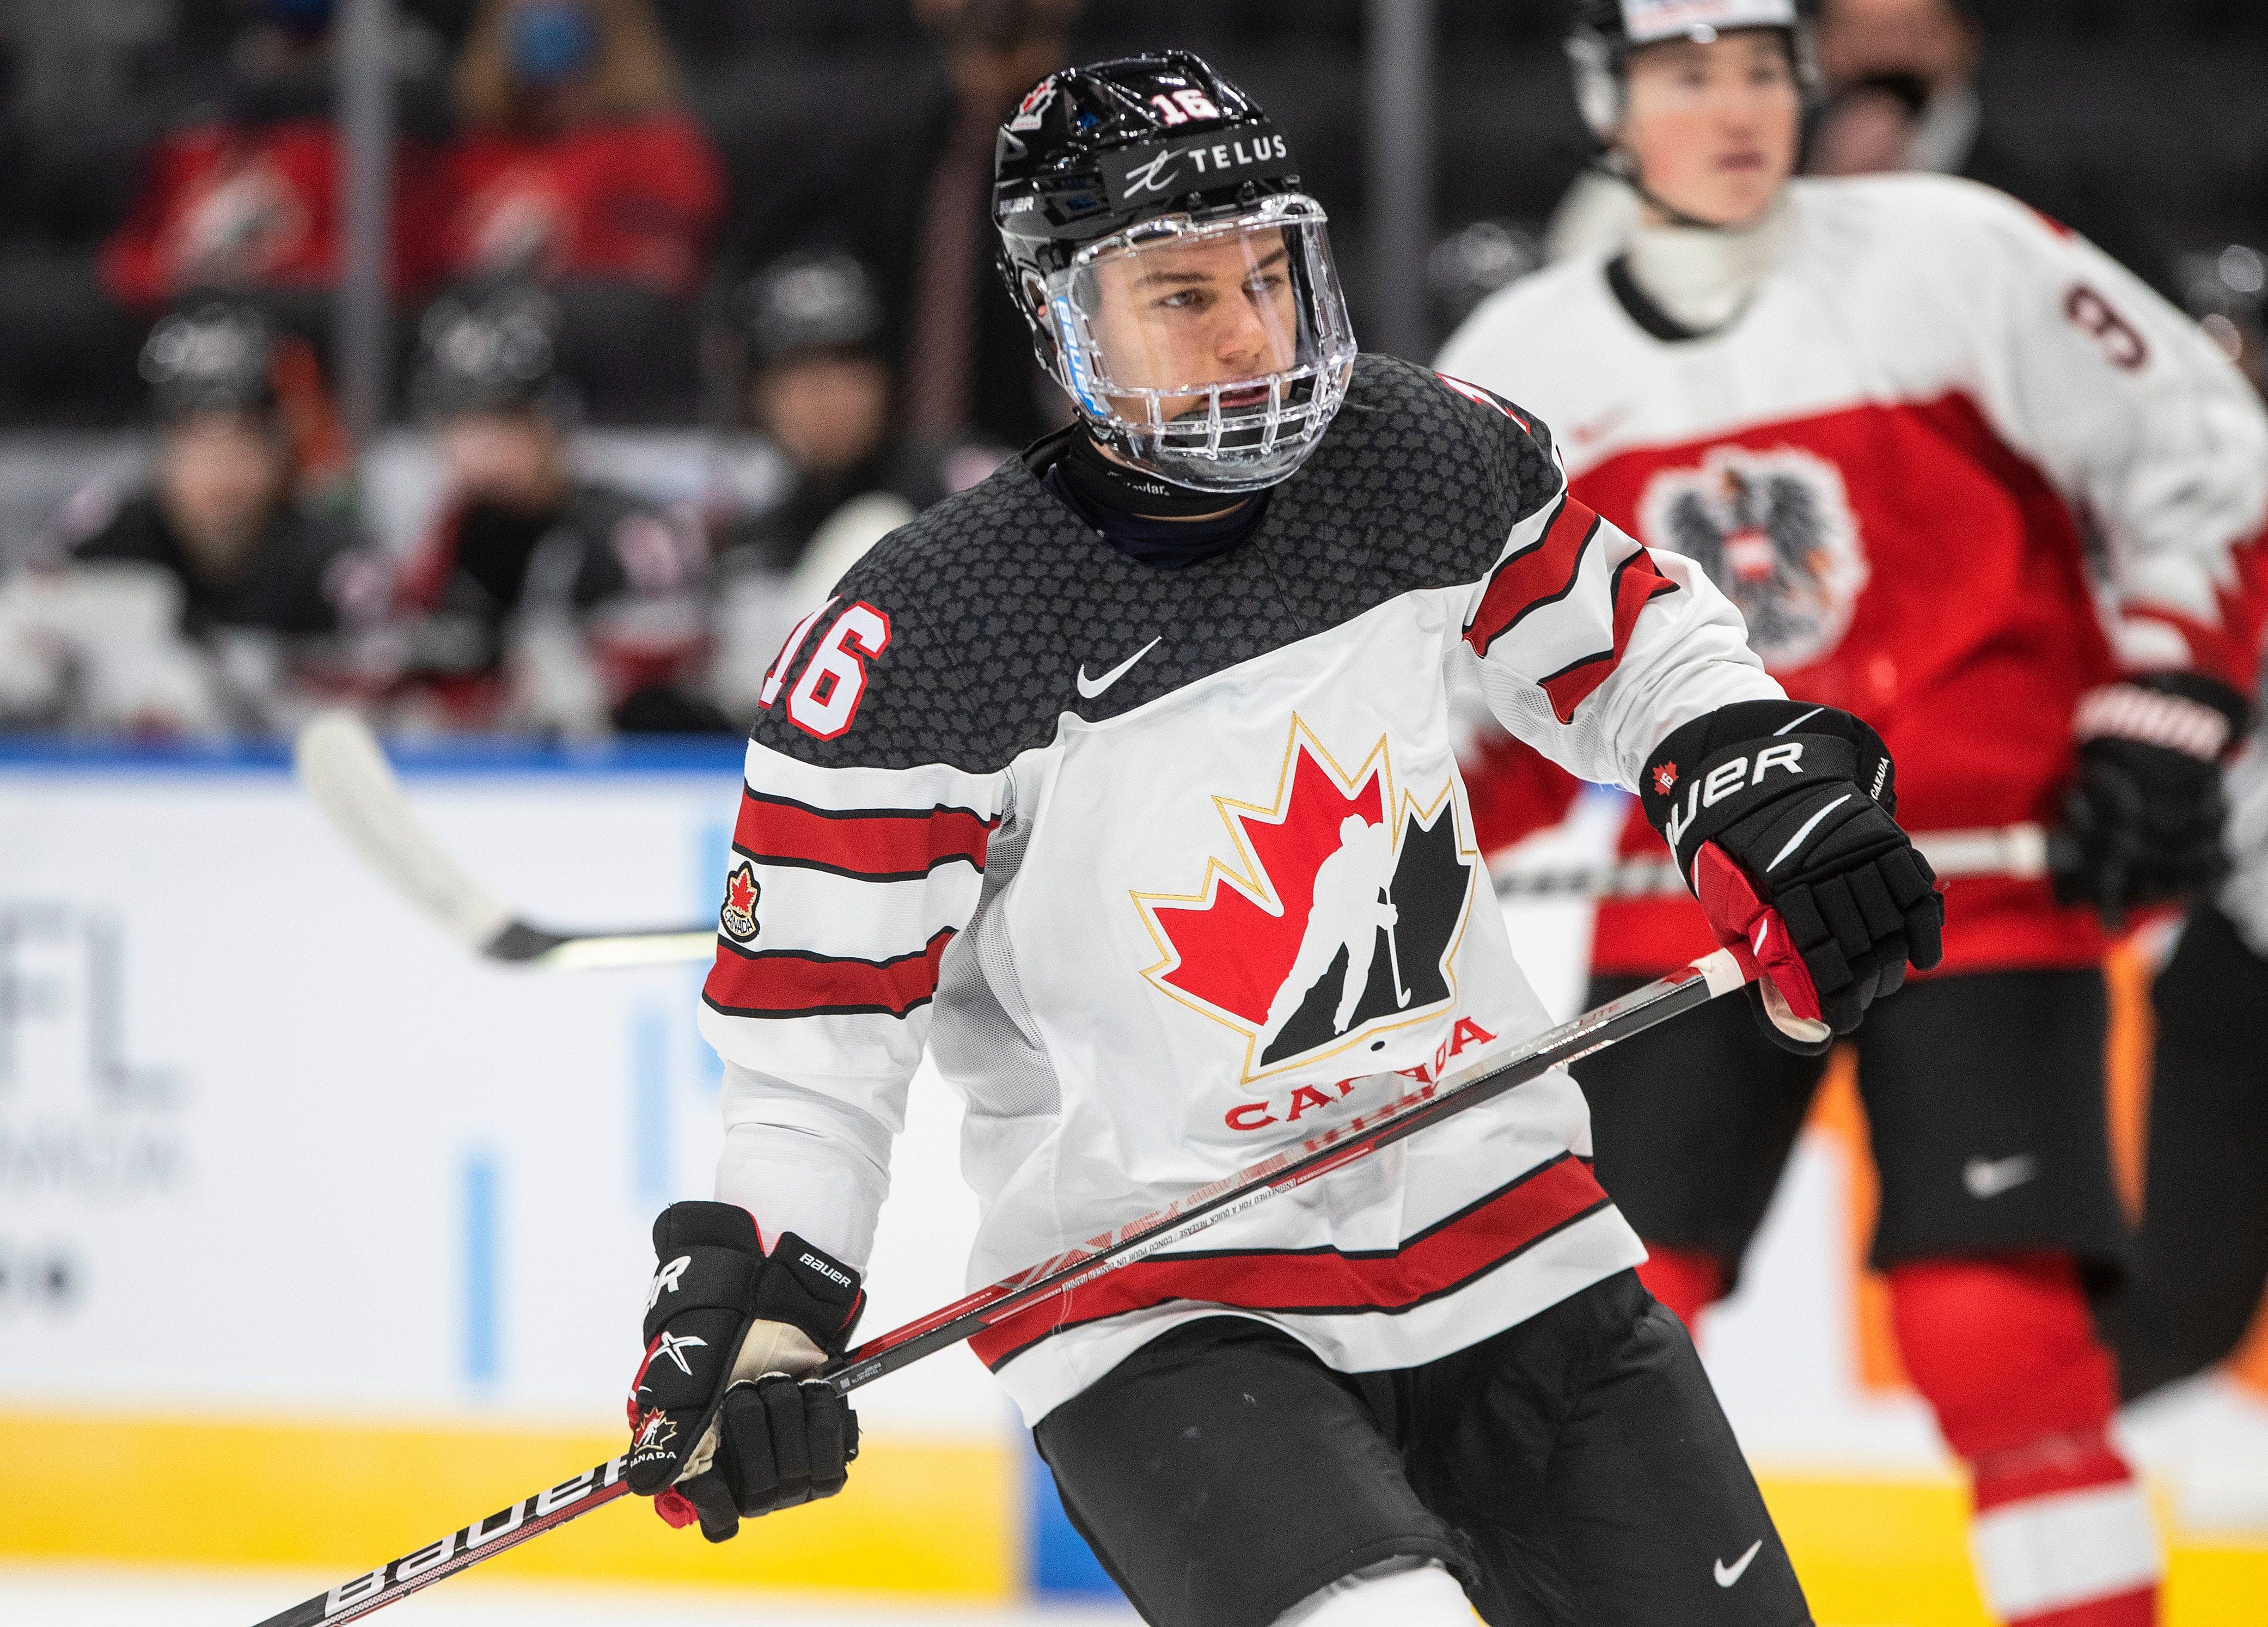 Top Junior Hockey Stars Will Meet When U.S. Faces Canada - The New